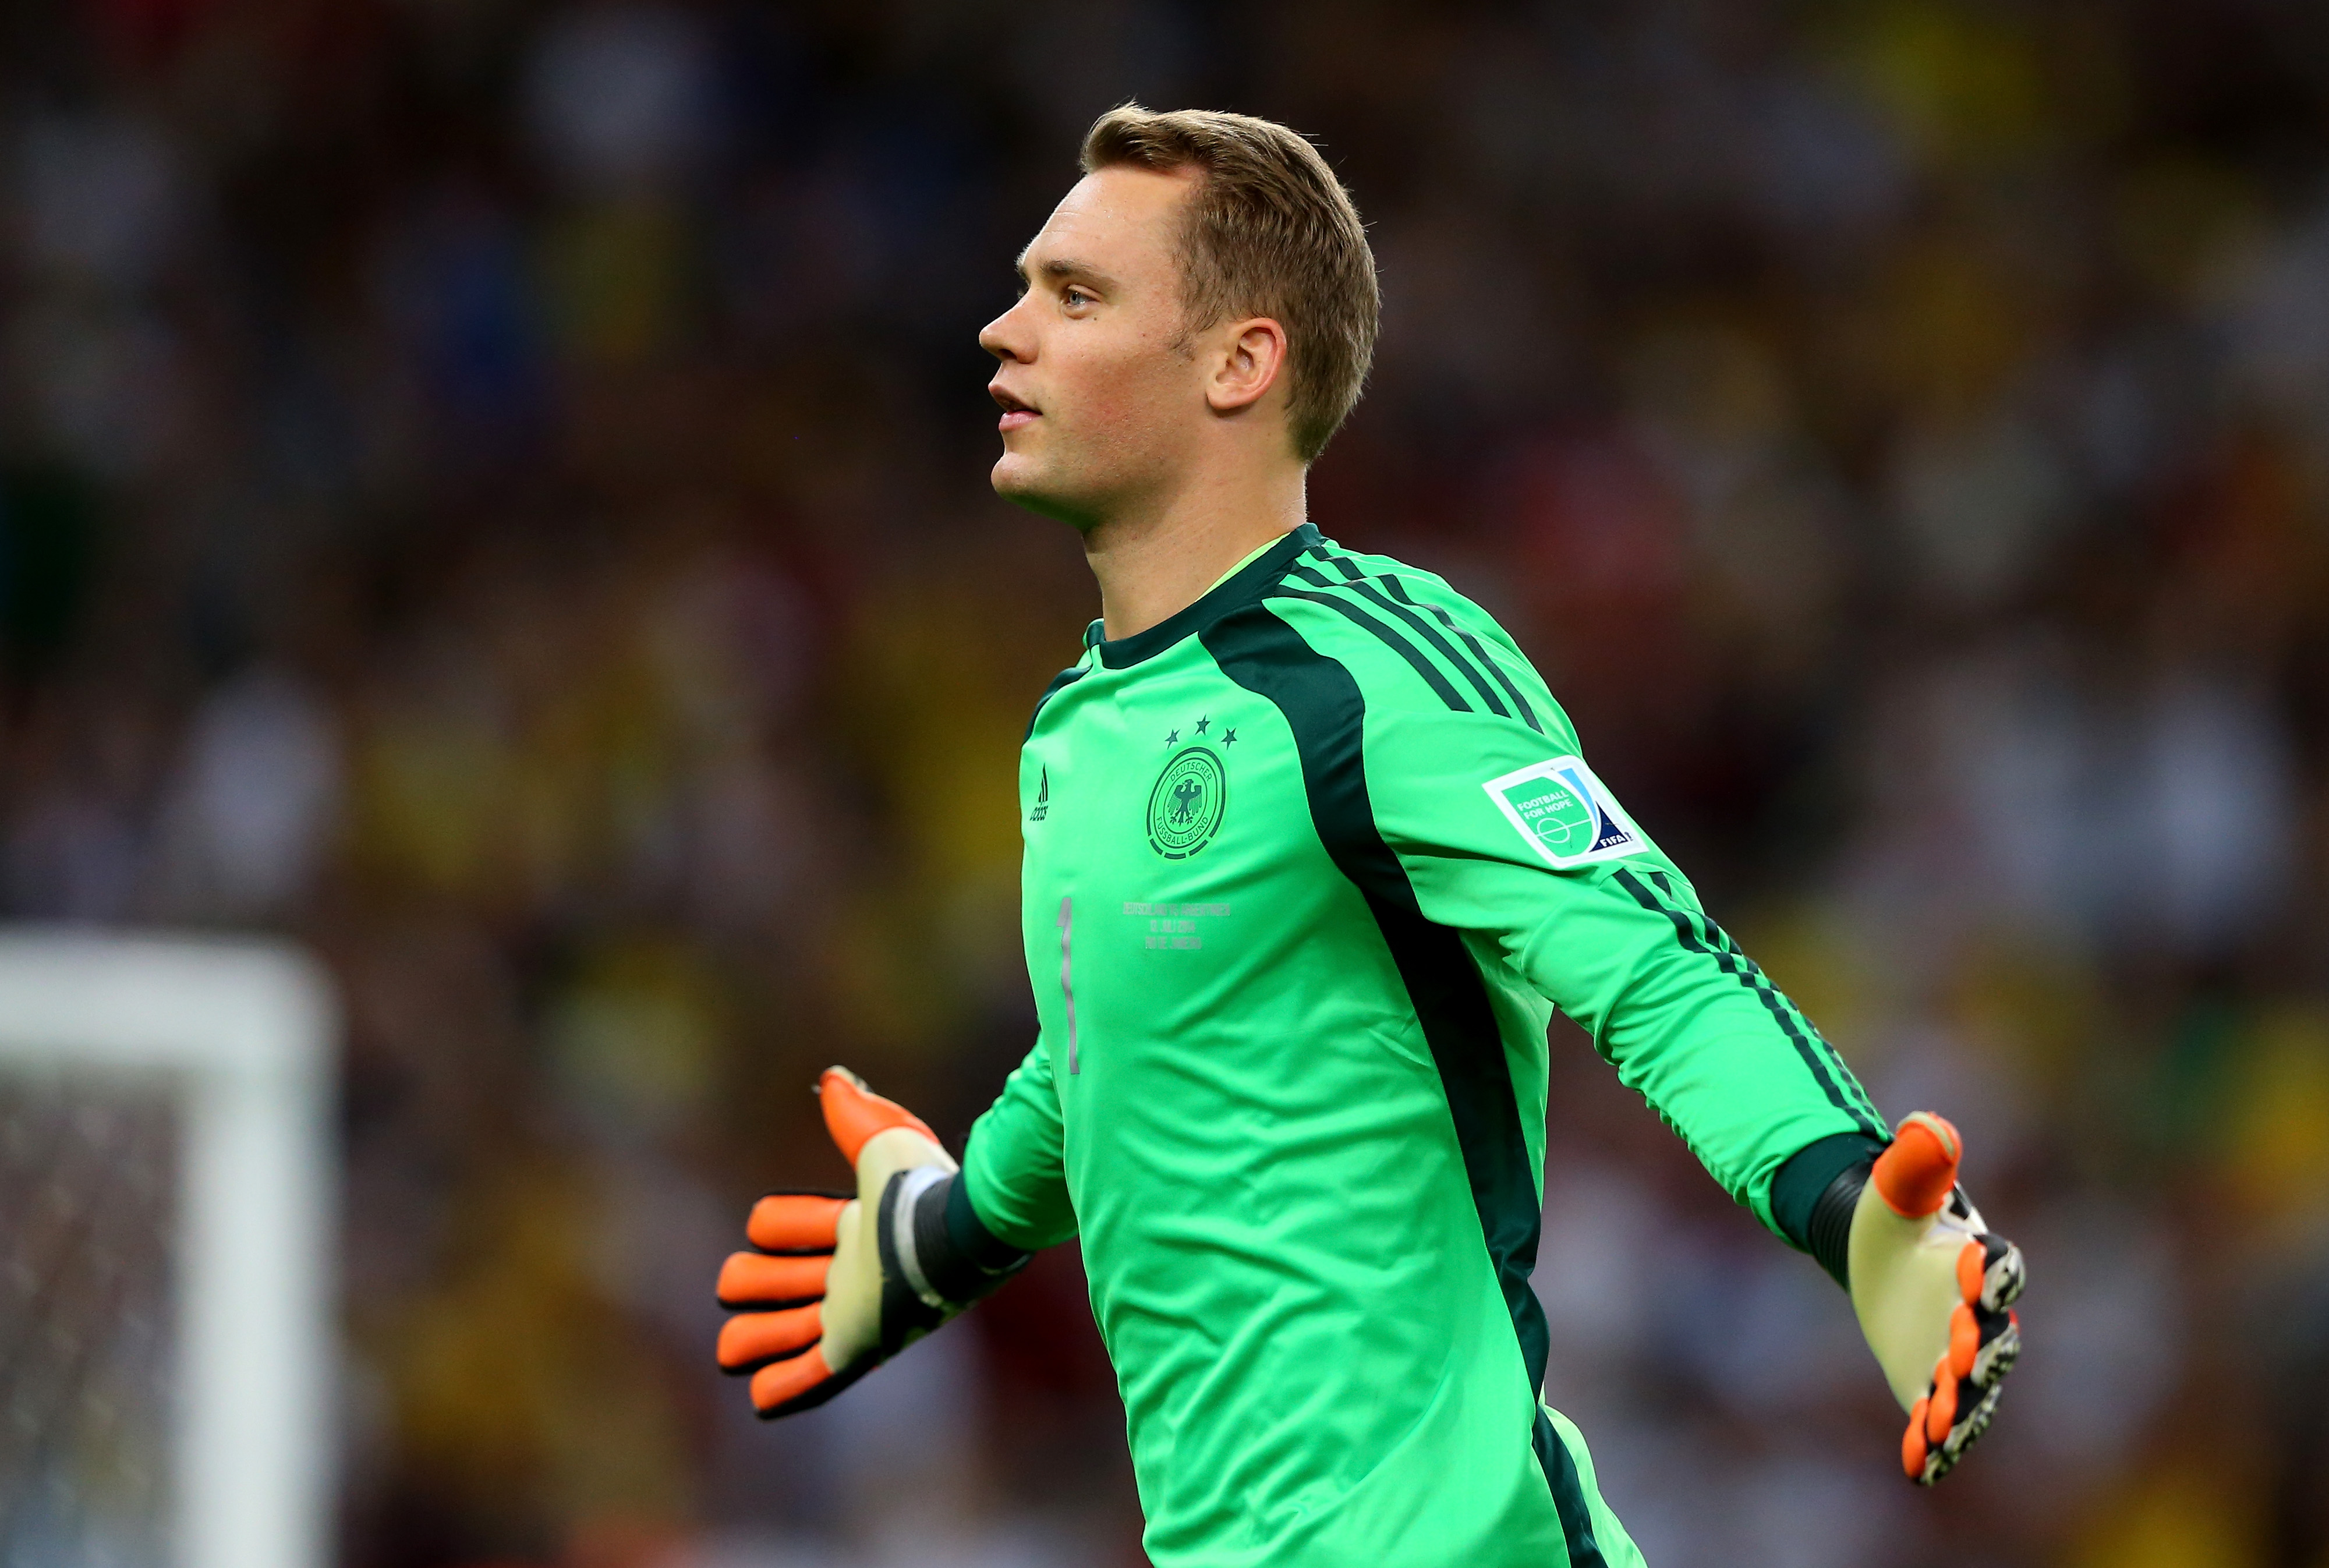 Manuel Neuer celebrates Germany's goal in the 2014 World Cup final against Argentina.